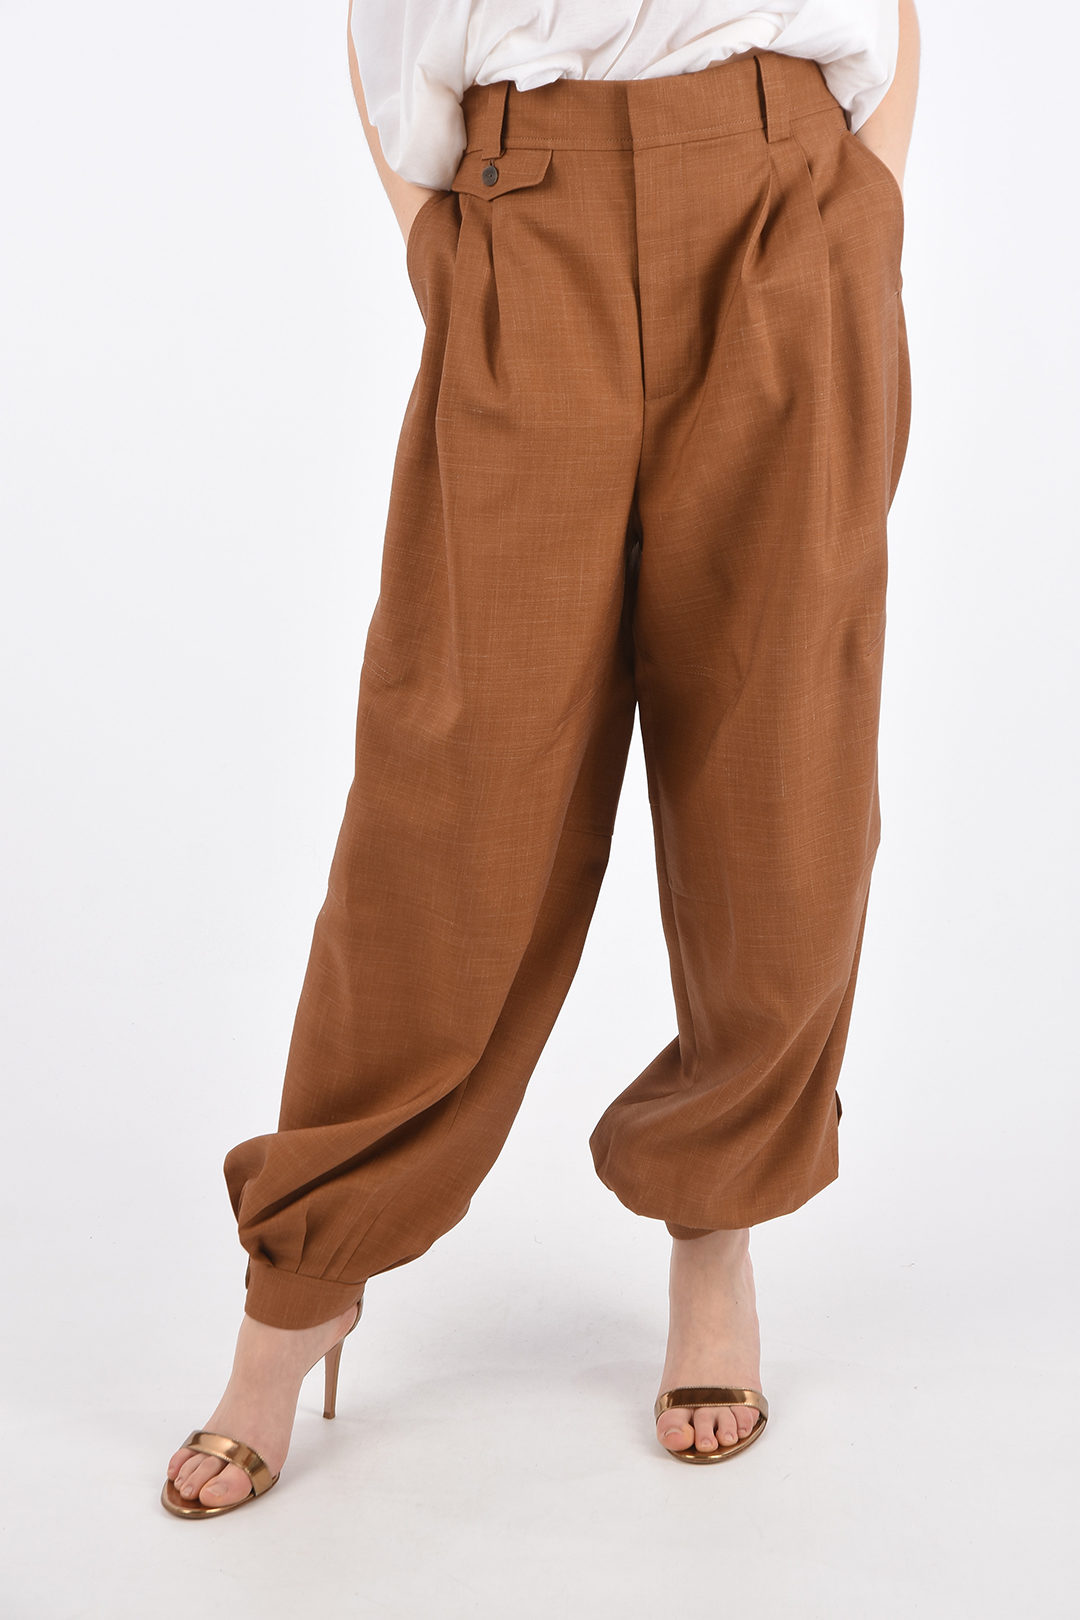 Loewe Double Pleat Pants with Ankle Buttons women - Glamood Outlet